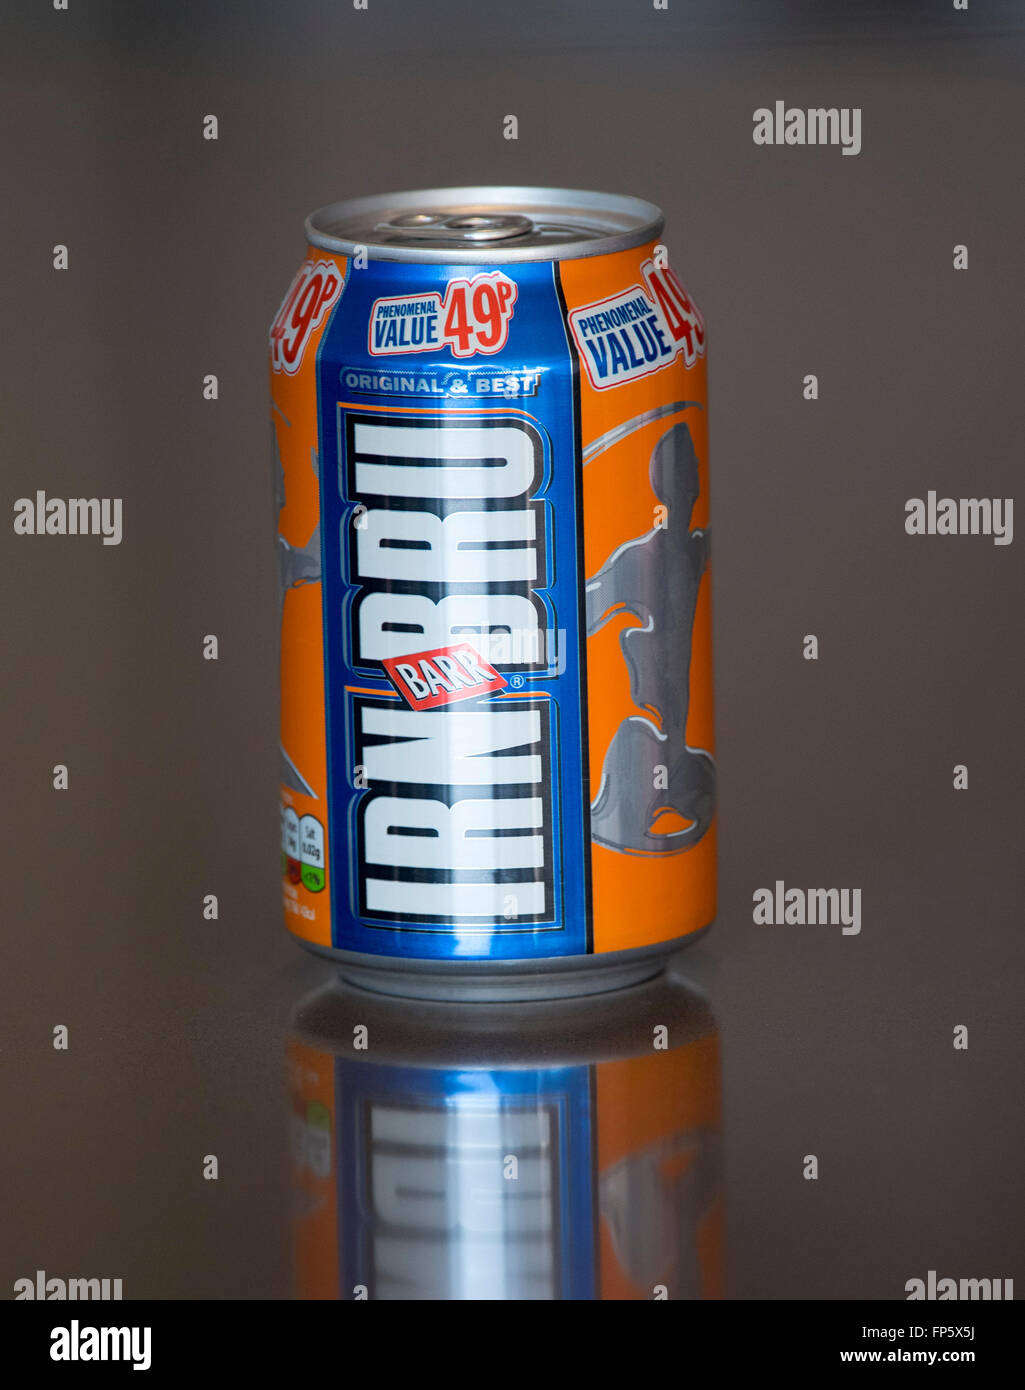 Sugar tax fizzy drink sugary drinks cans Stock Photo